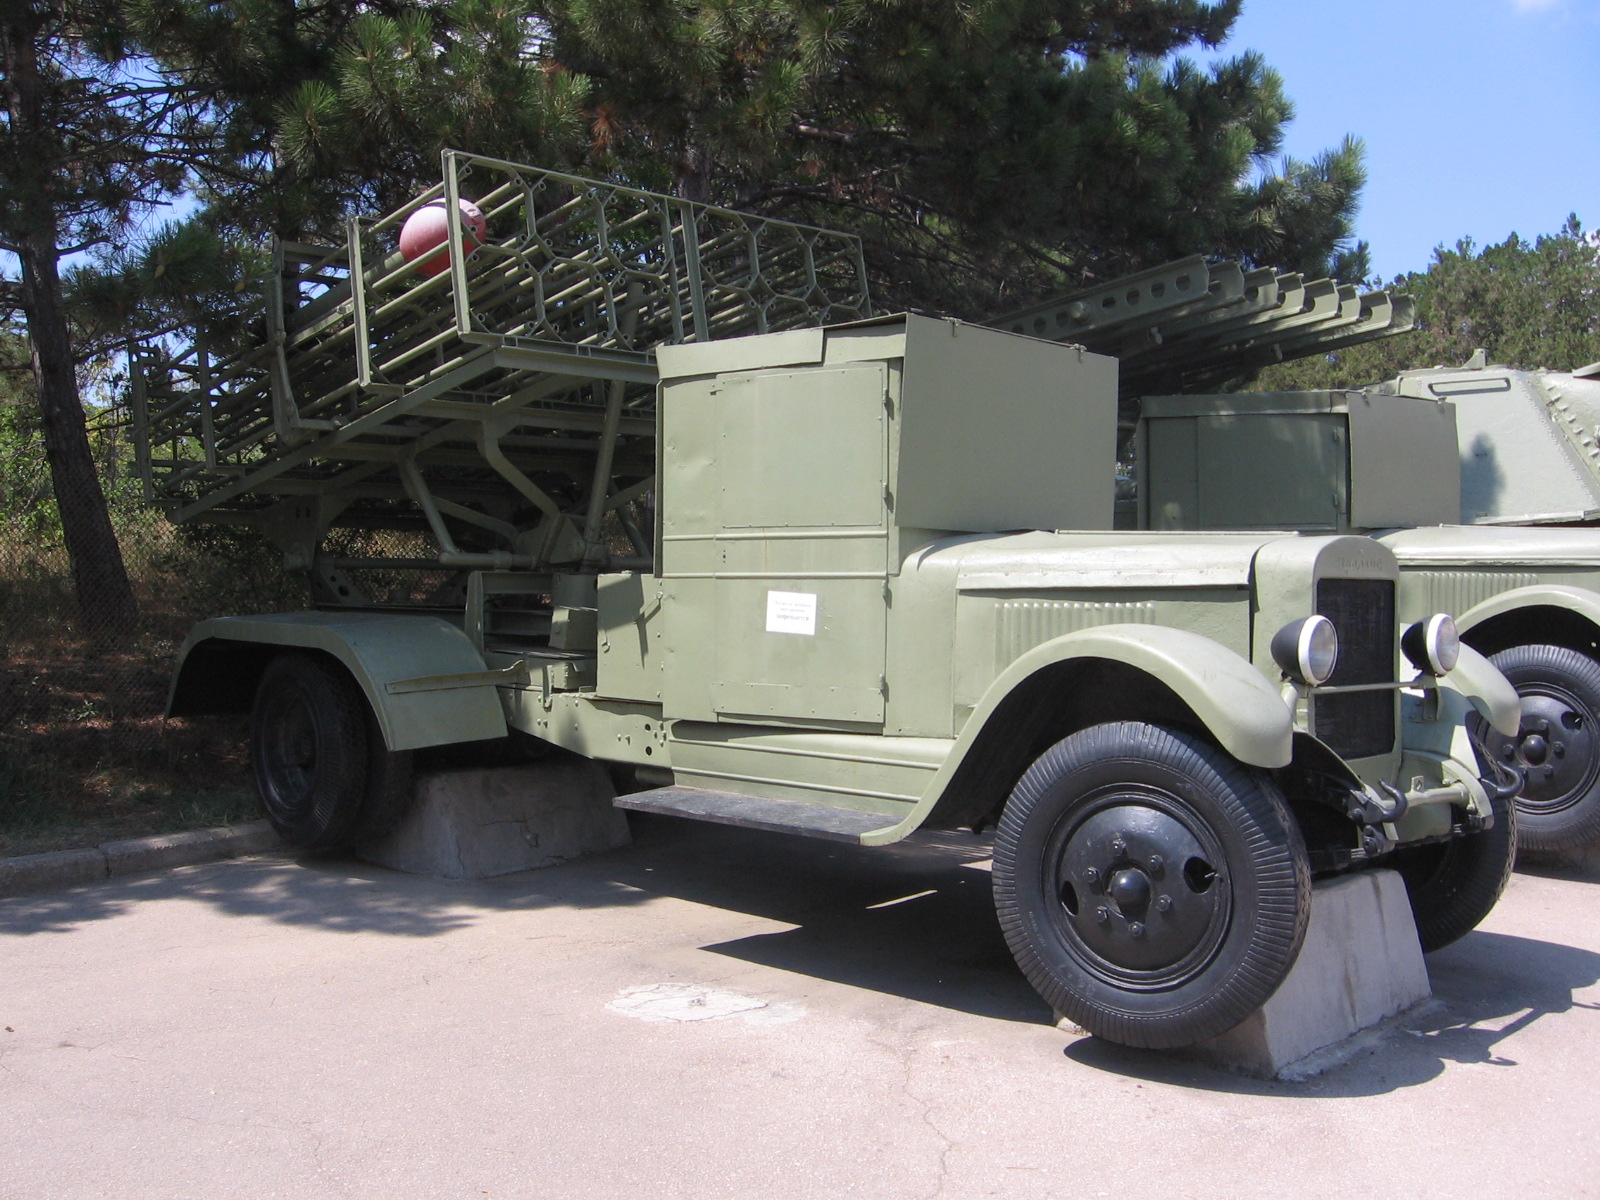 BM-31-12 on ZiS-12 chassis on display at Museum of Heroic Defense and Liberation of Sevastopol, Ukraine, 15 Aug 2007